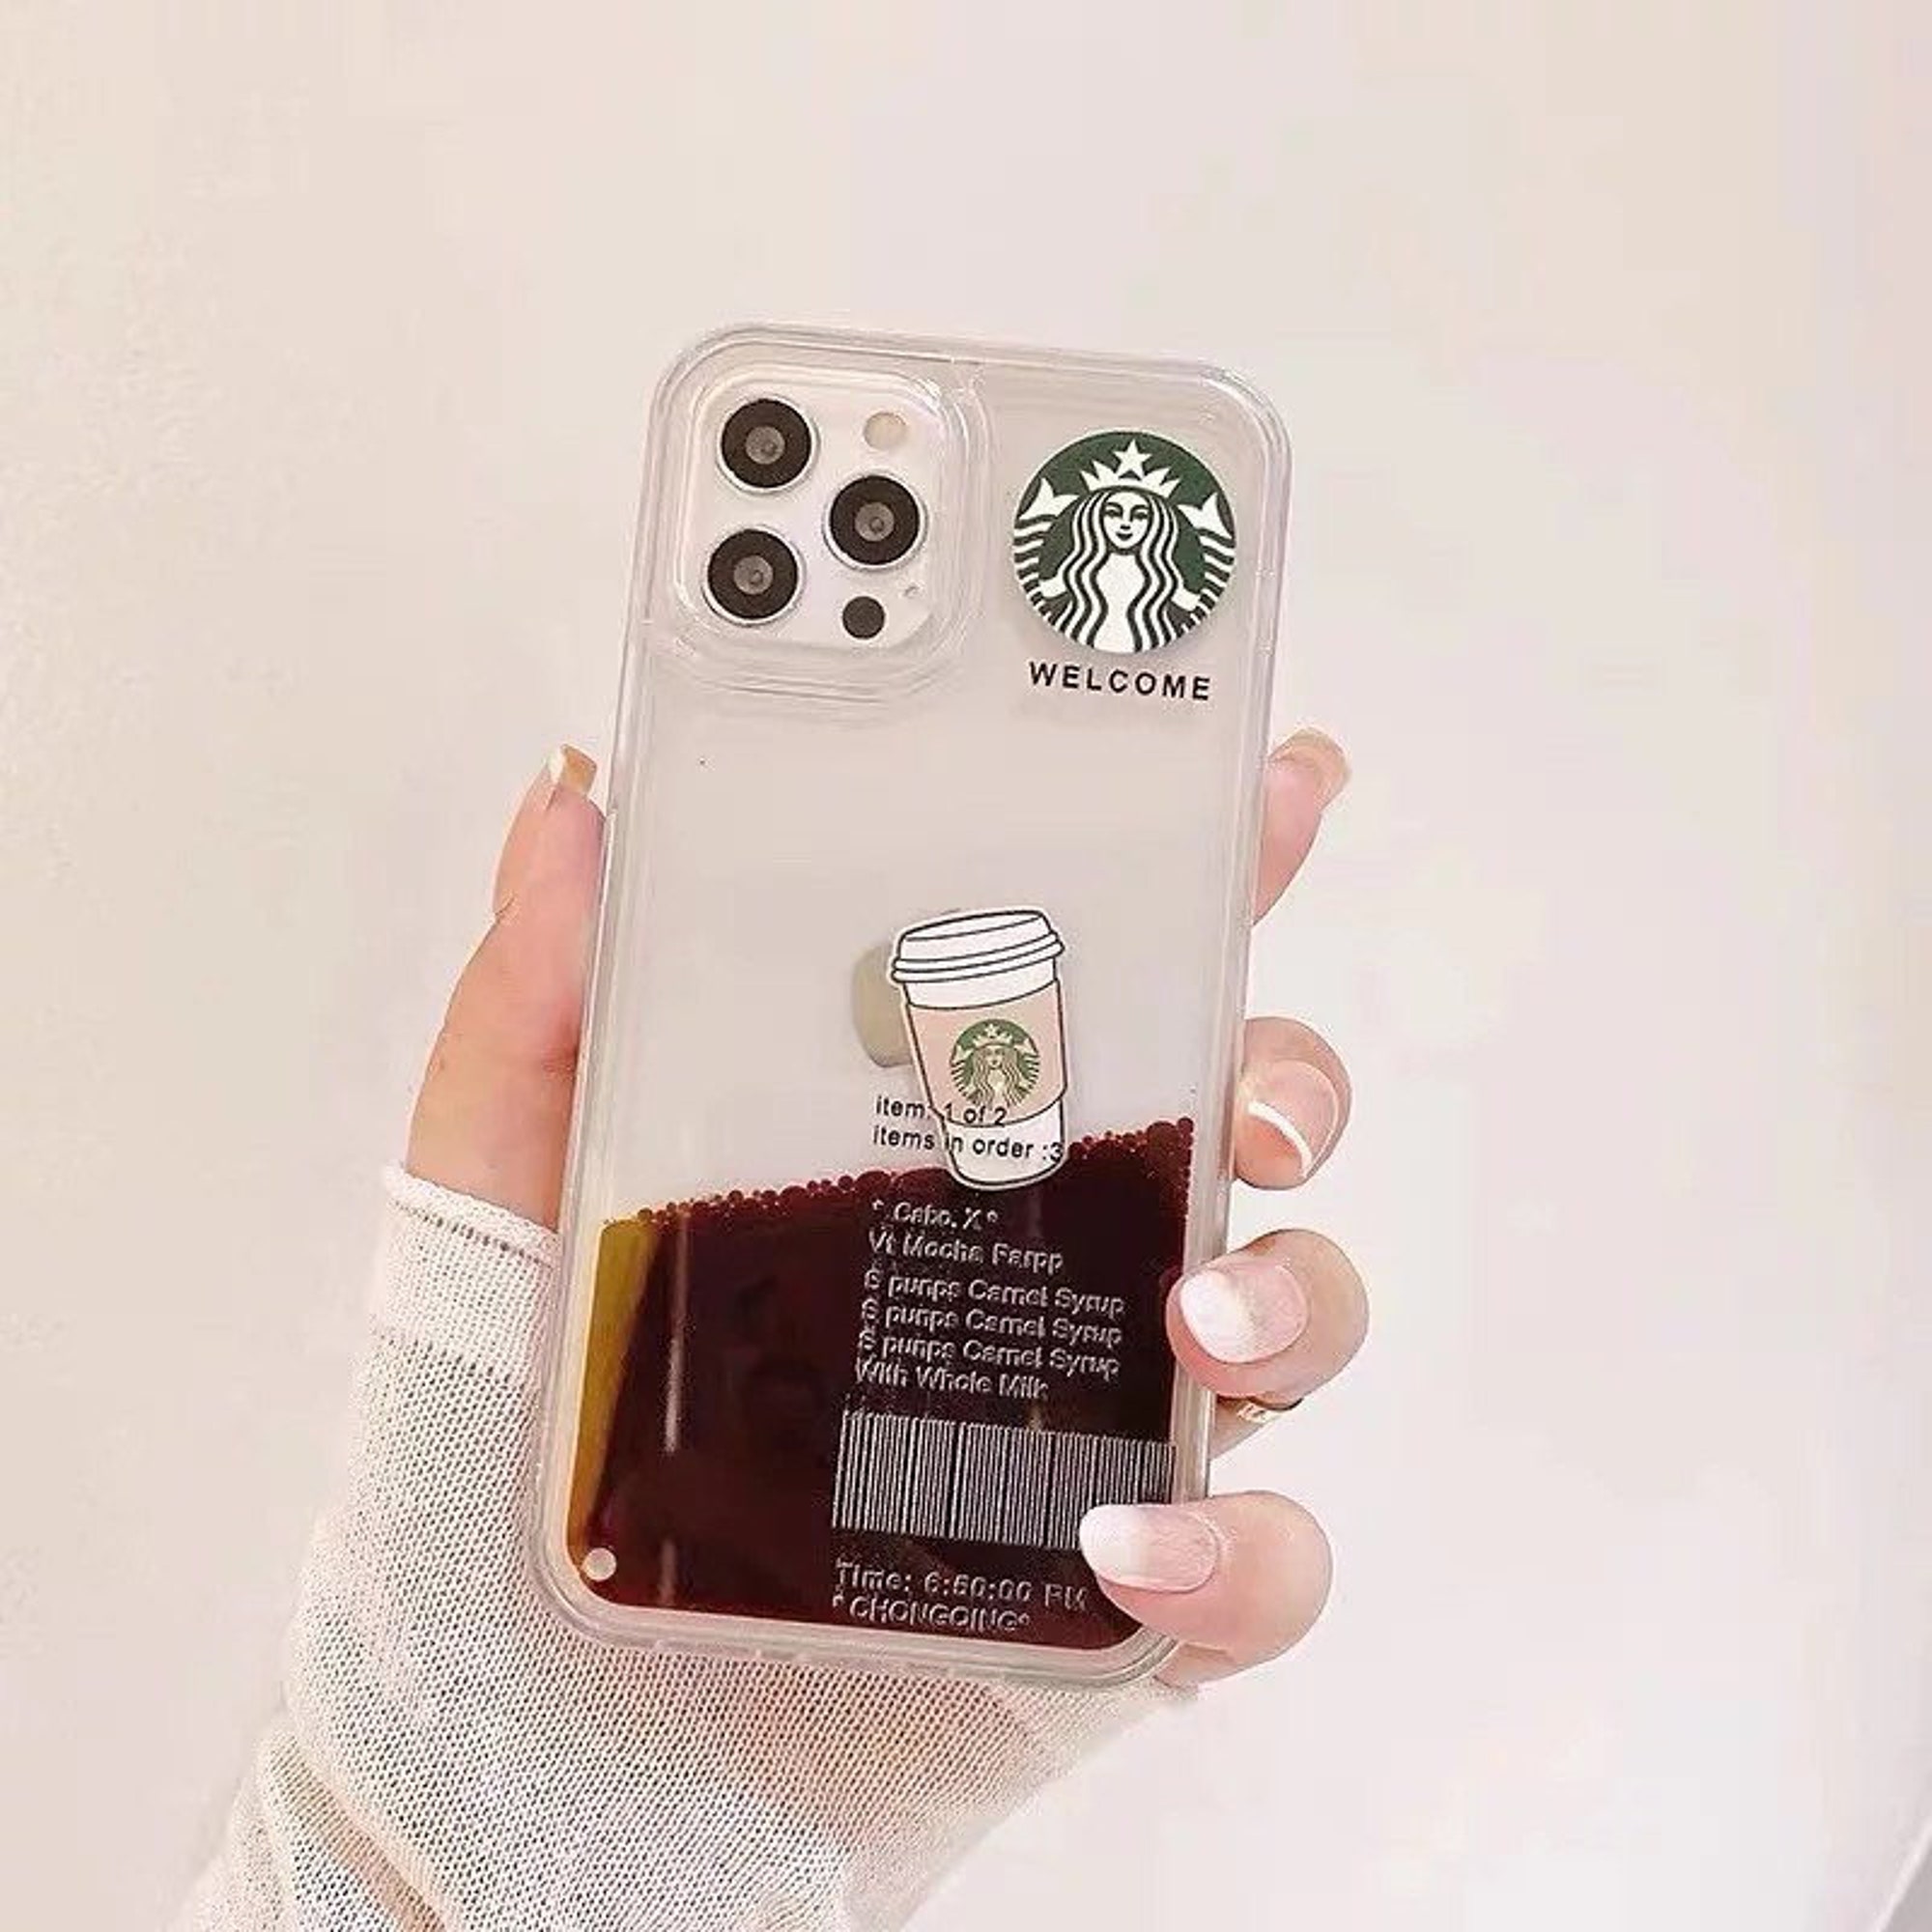 Quirky Starbucks Boba Style Liquid iPhone Cases 12, 12 Pro, 12 Pro Max, 13, 13 Pro, 13 Pro Max UK Stock Gift wrapping + Personalise